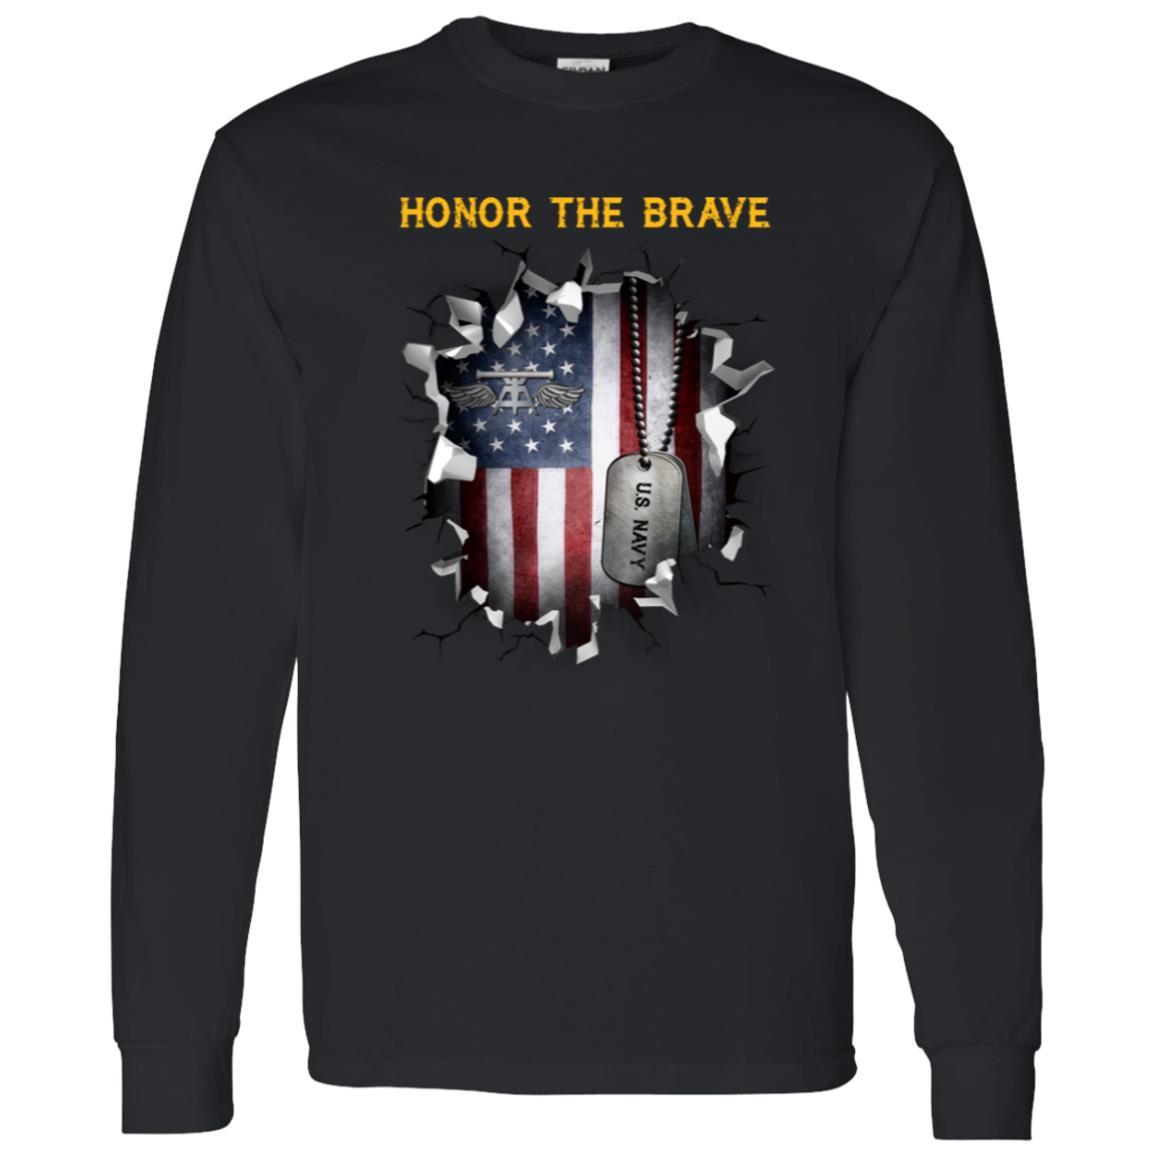 Navy Aviation Fire Control Tech Navy AQ - Honor The Brave Front Shirt